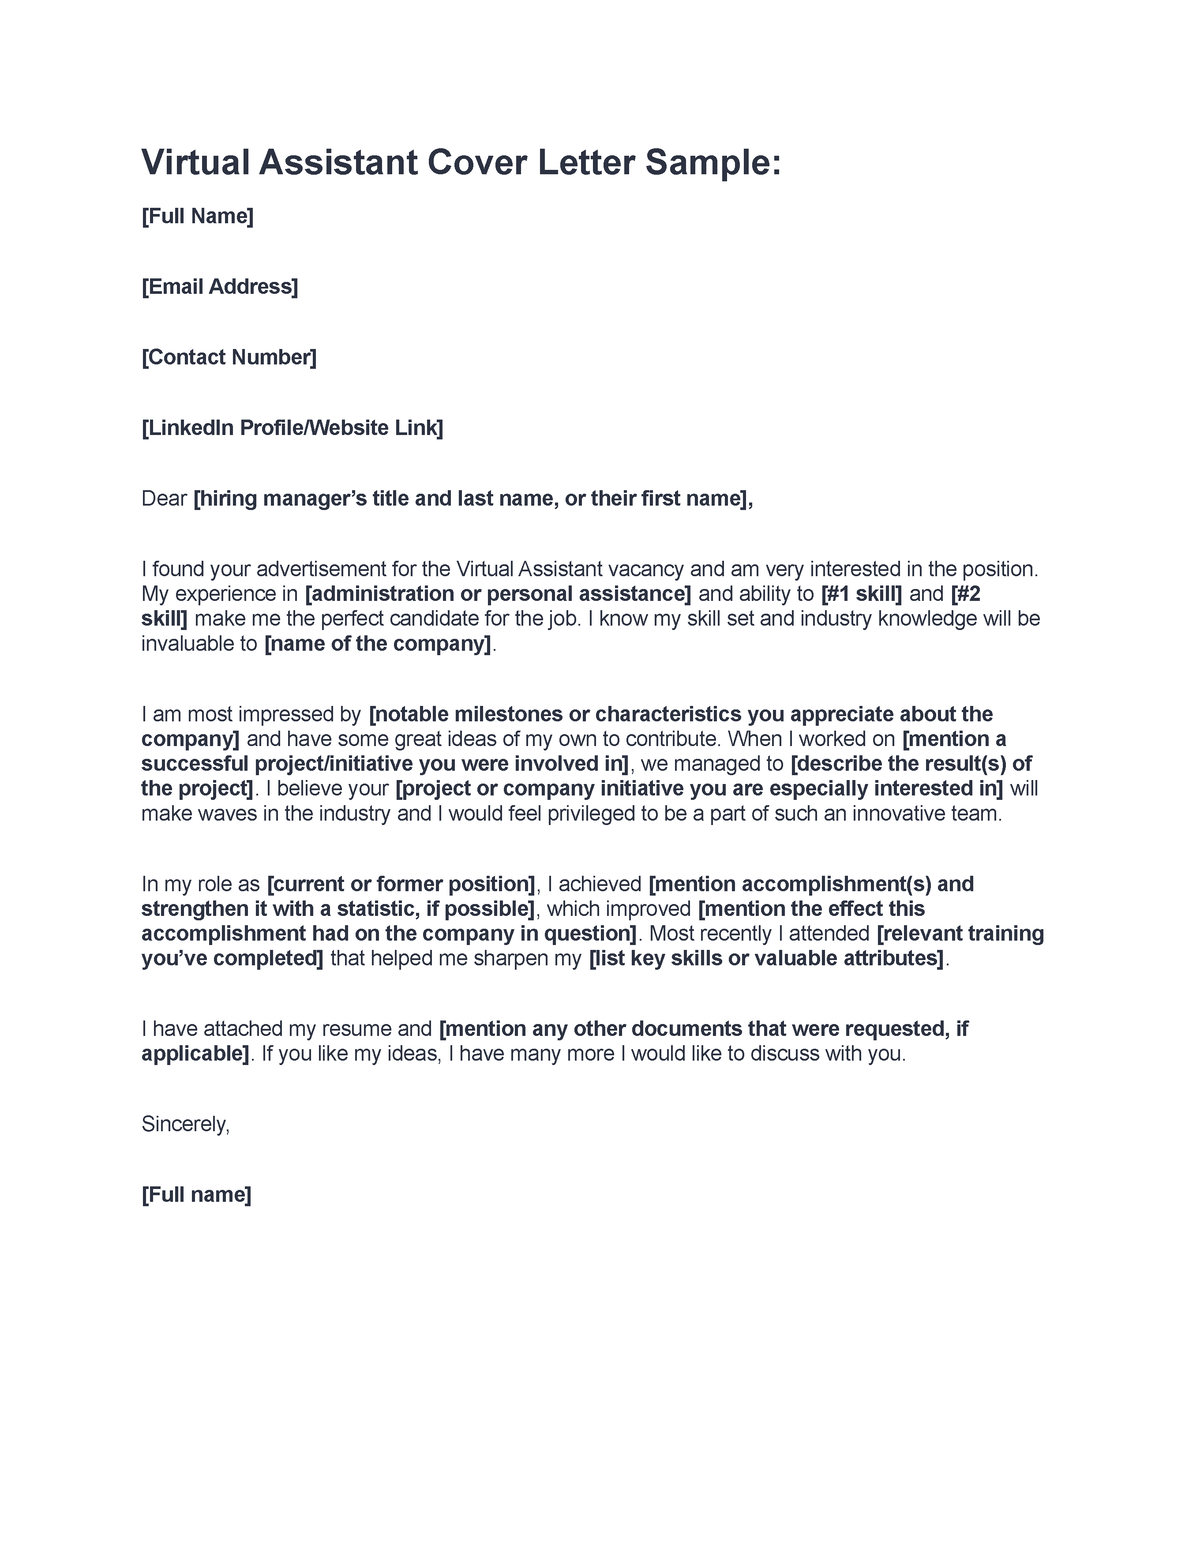 cover letter for healthcare virtual assistant